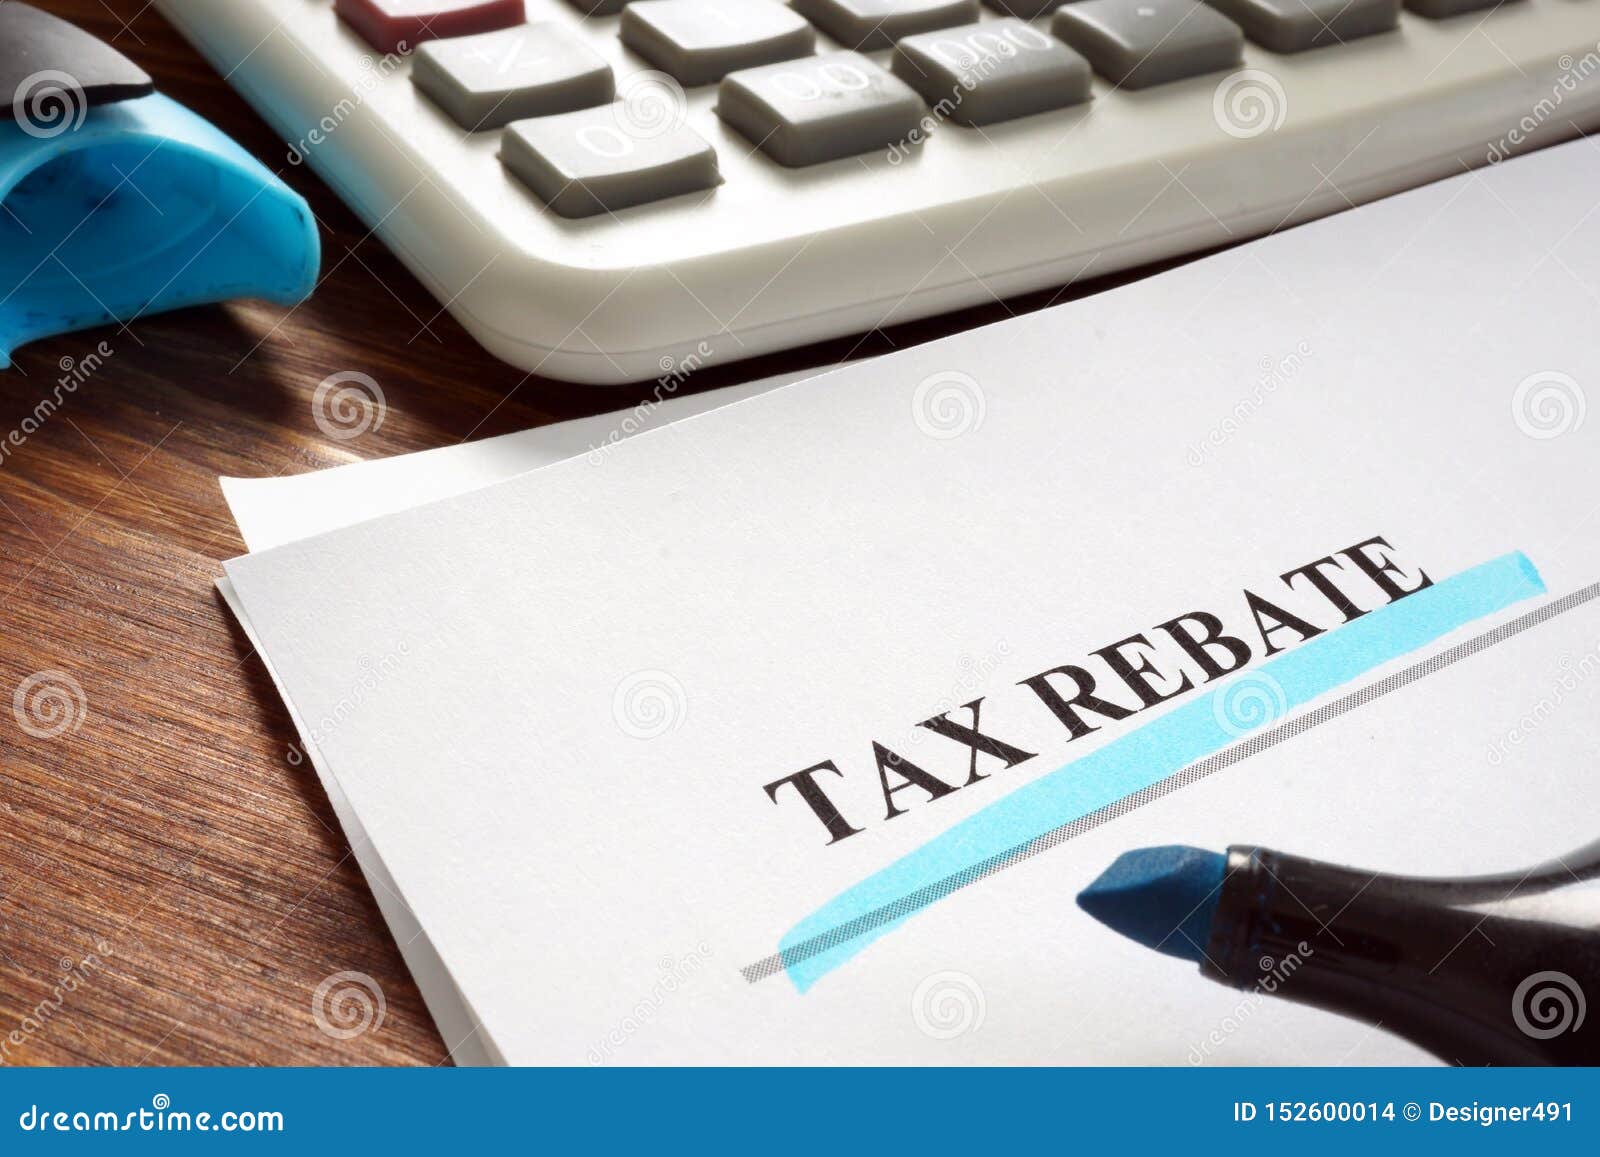 tax-rebate-underlined-inscription-on-documents-stock-photo-image-of